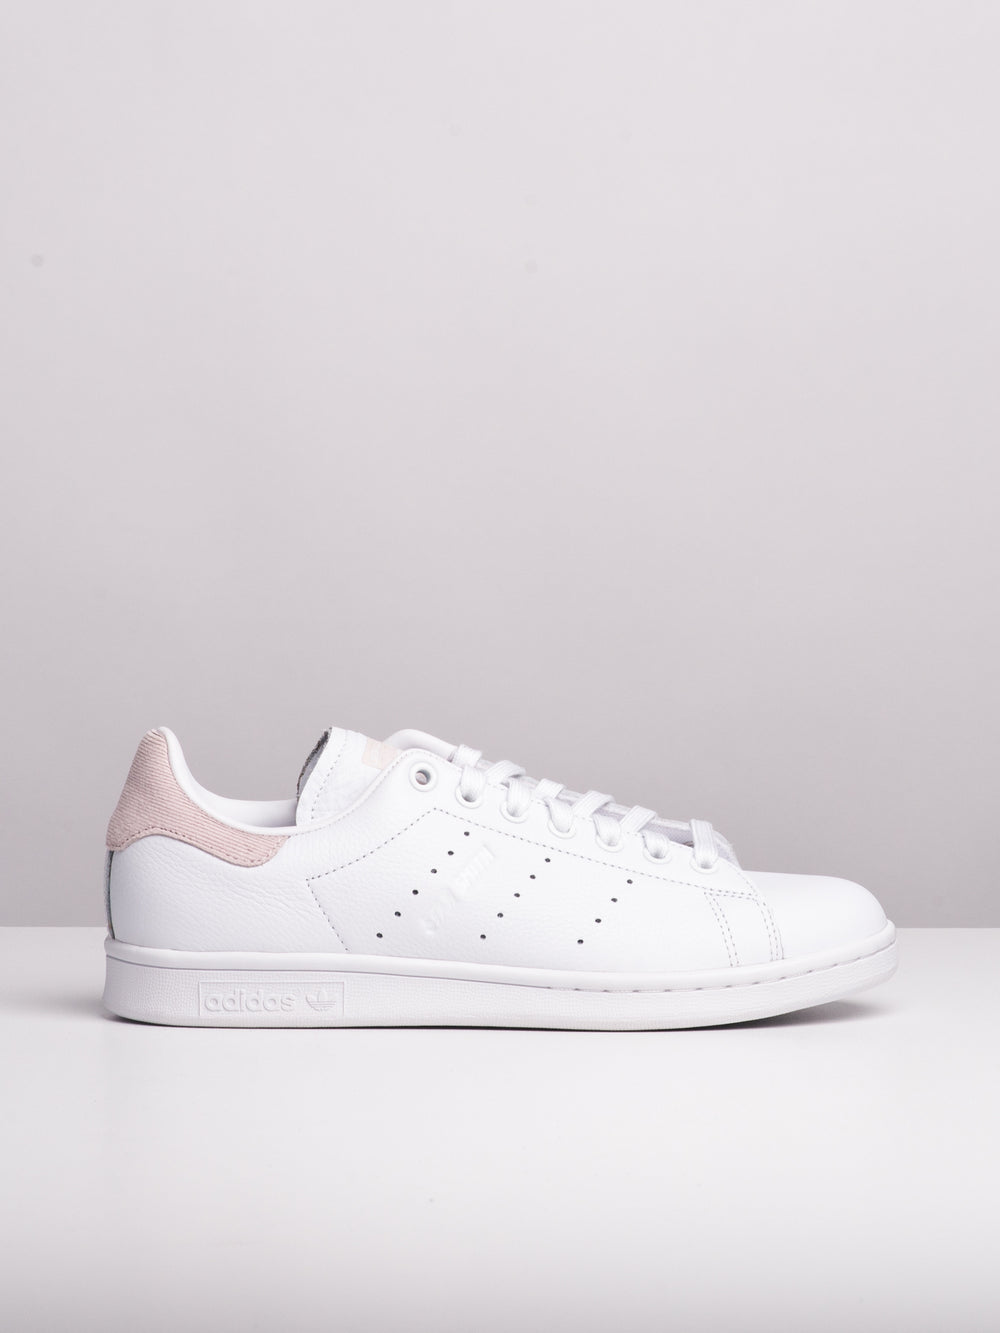 WOMENS STAN SMITH W - WHITE/ORCHID 